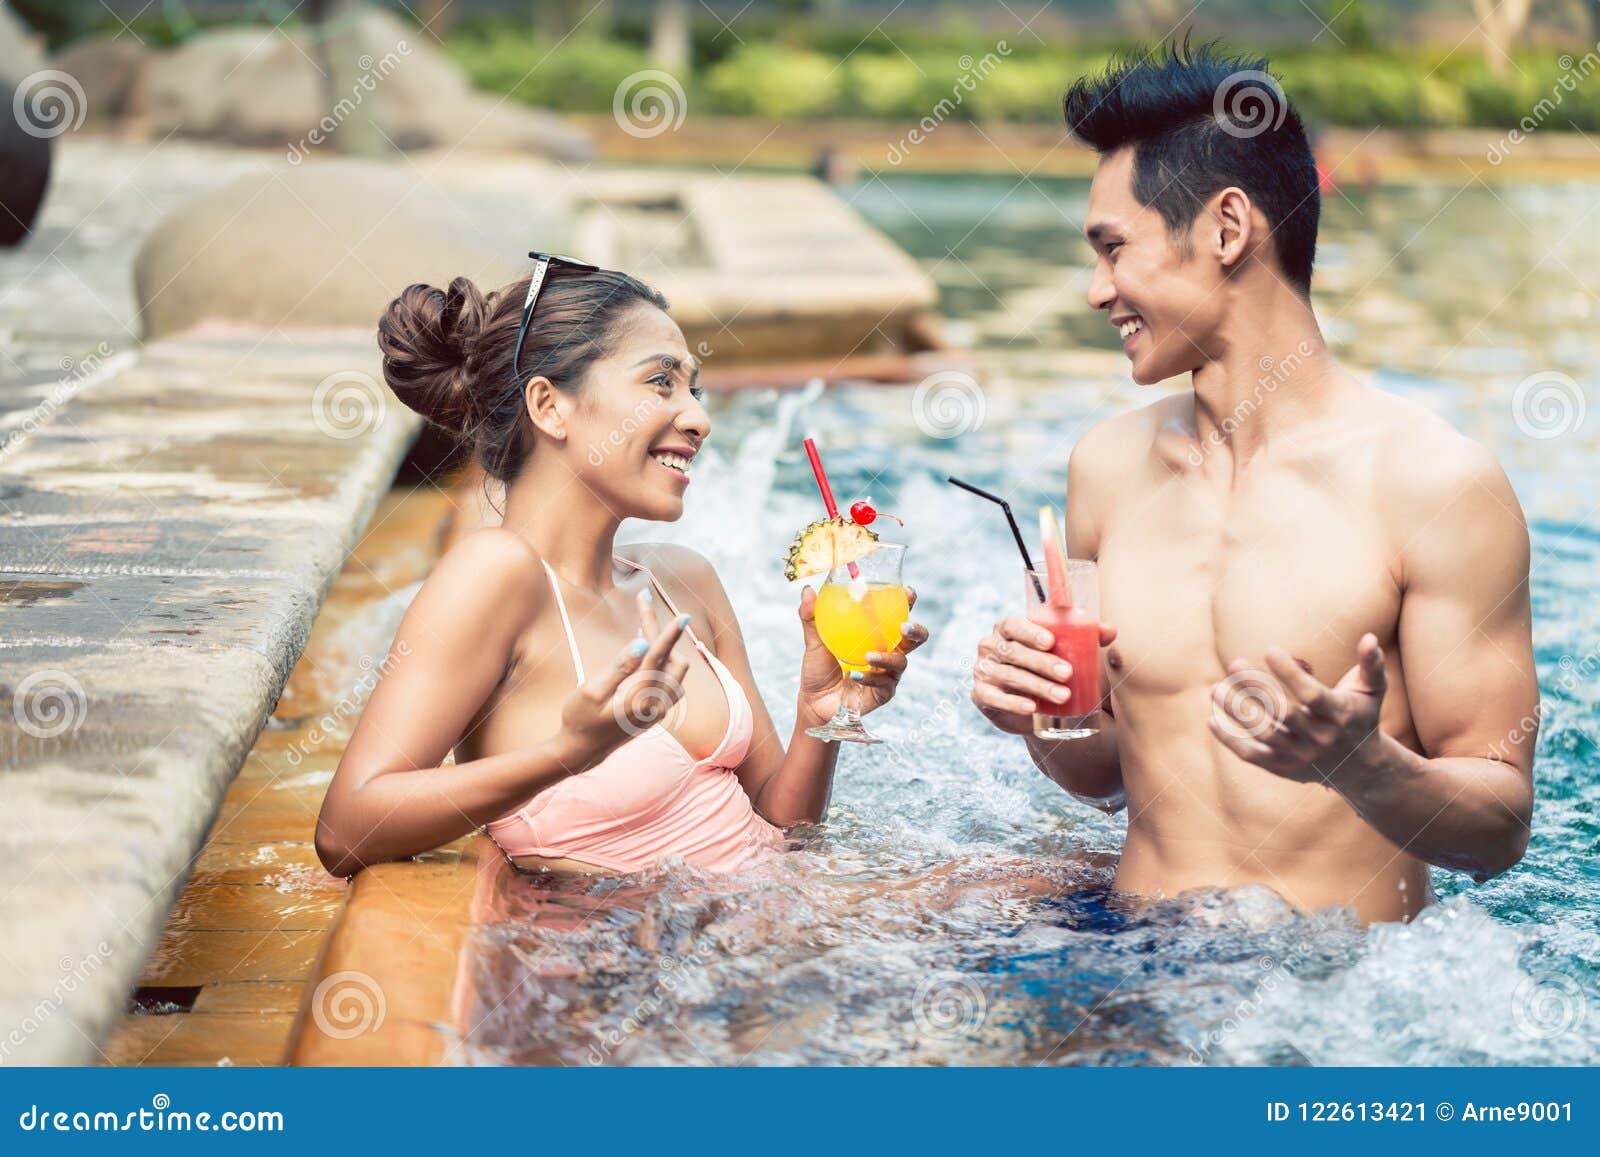 Young Man Flirting with an Attractive Woman in a Trendy Swimming Pool Stock Image